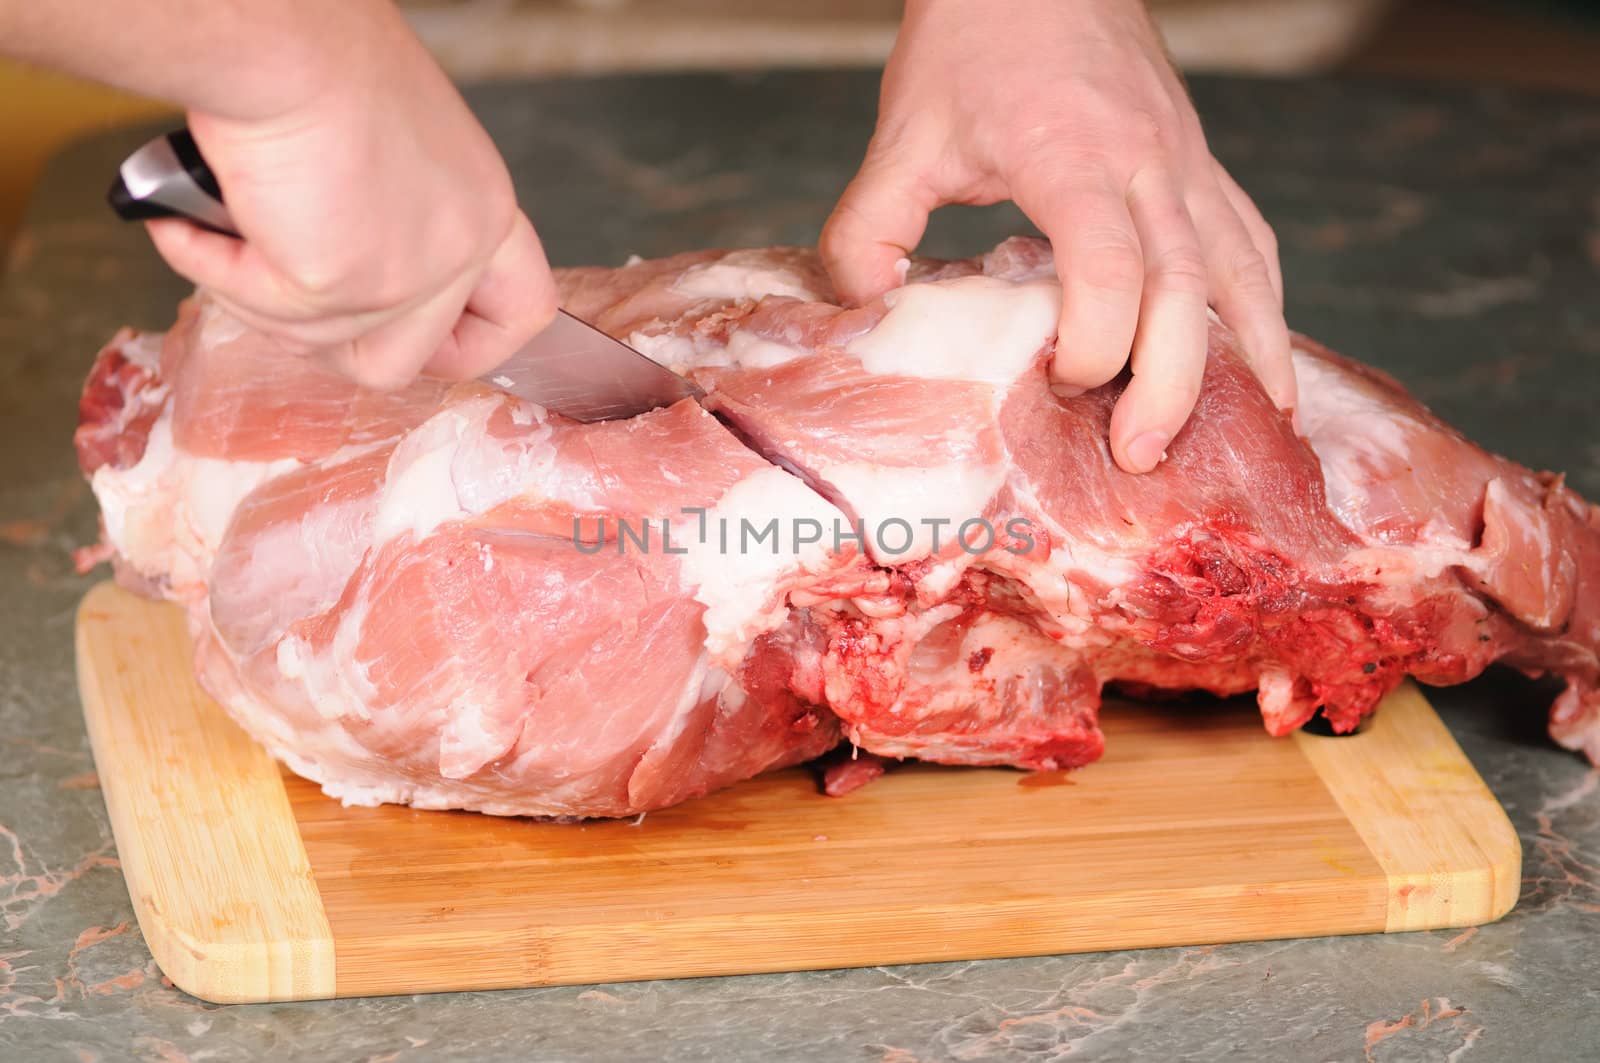 cutting of the big piece of meat